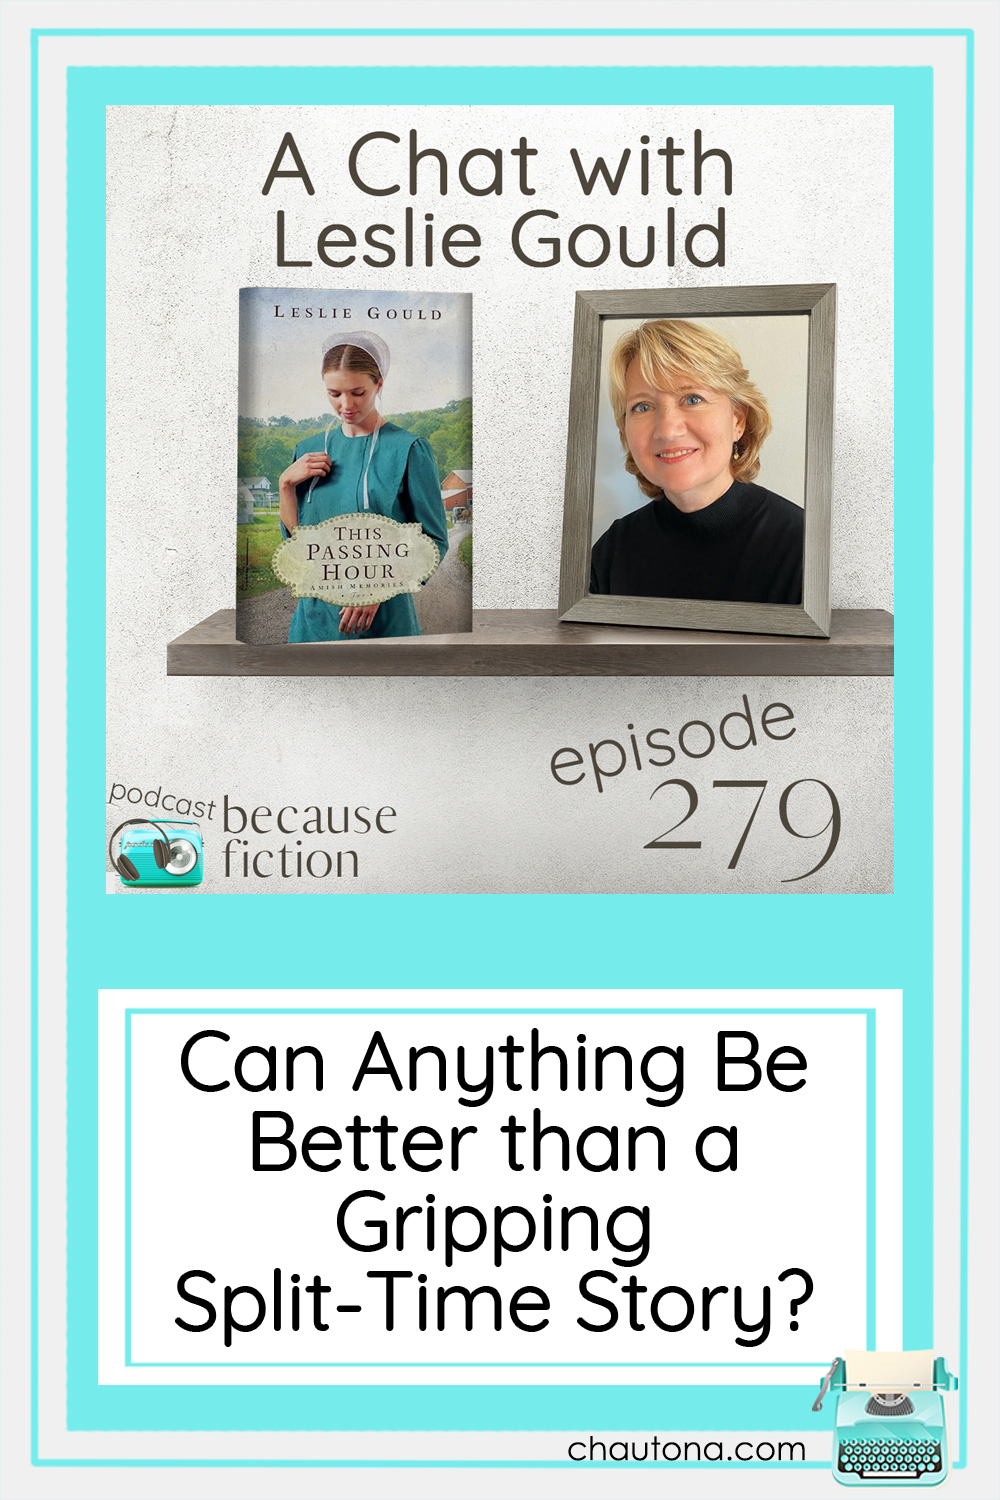 Leslie Gould has a new release coming in just a few days, and boy am I excited about it. Listen in to see why. via @chautonahavig